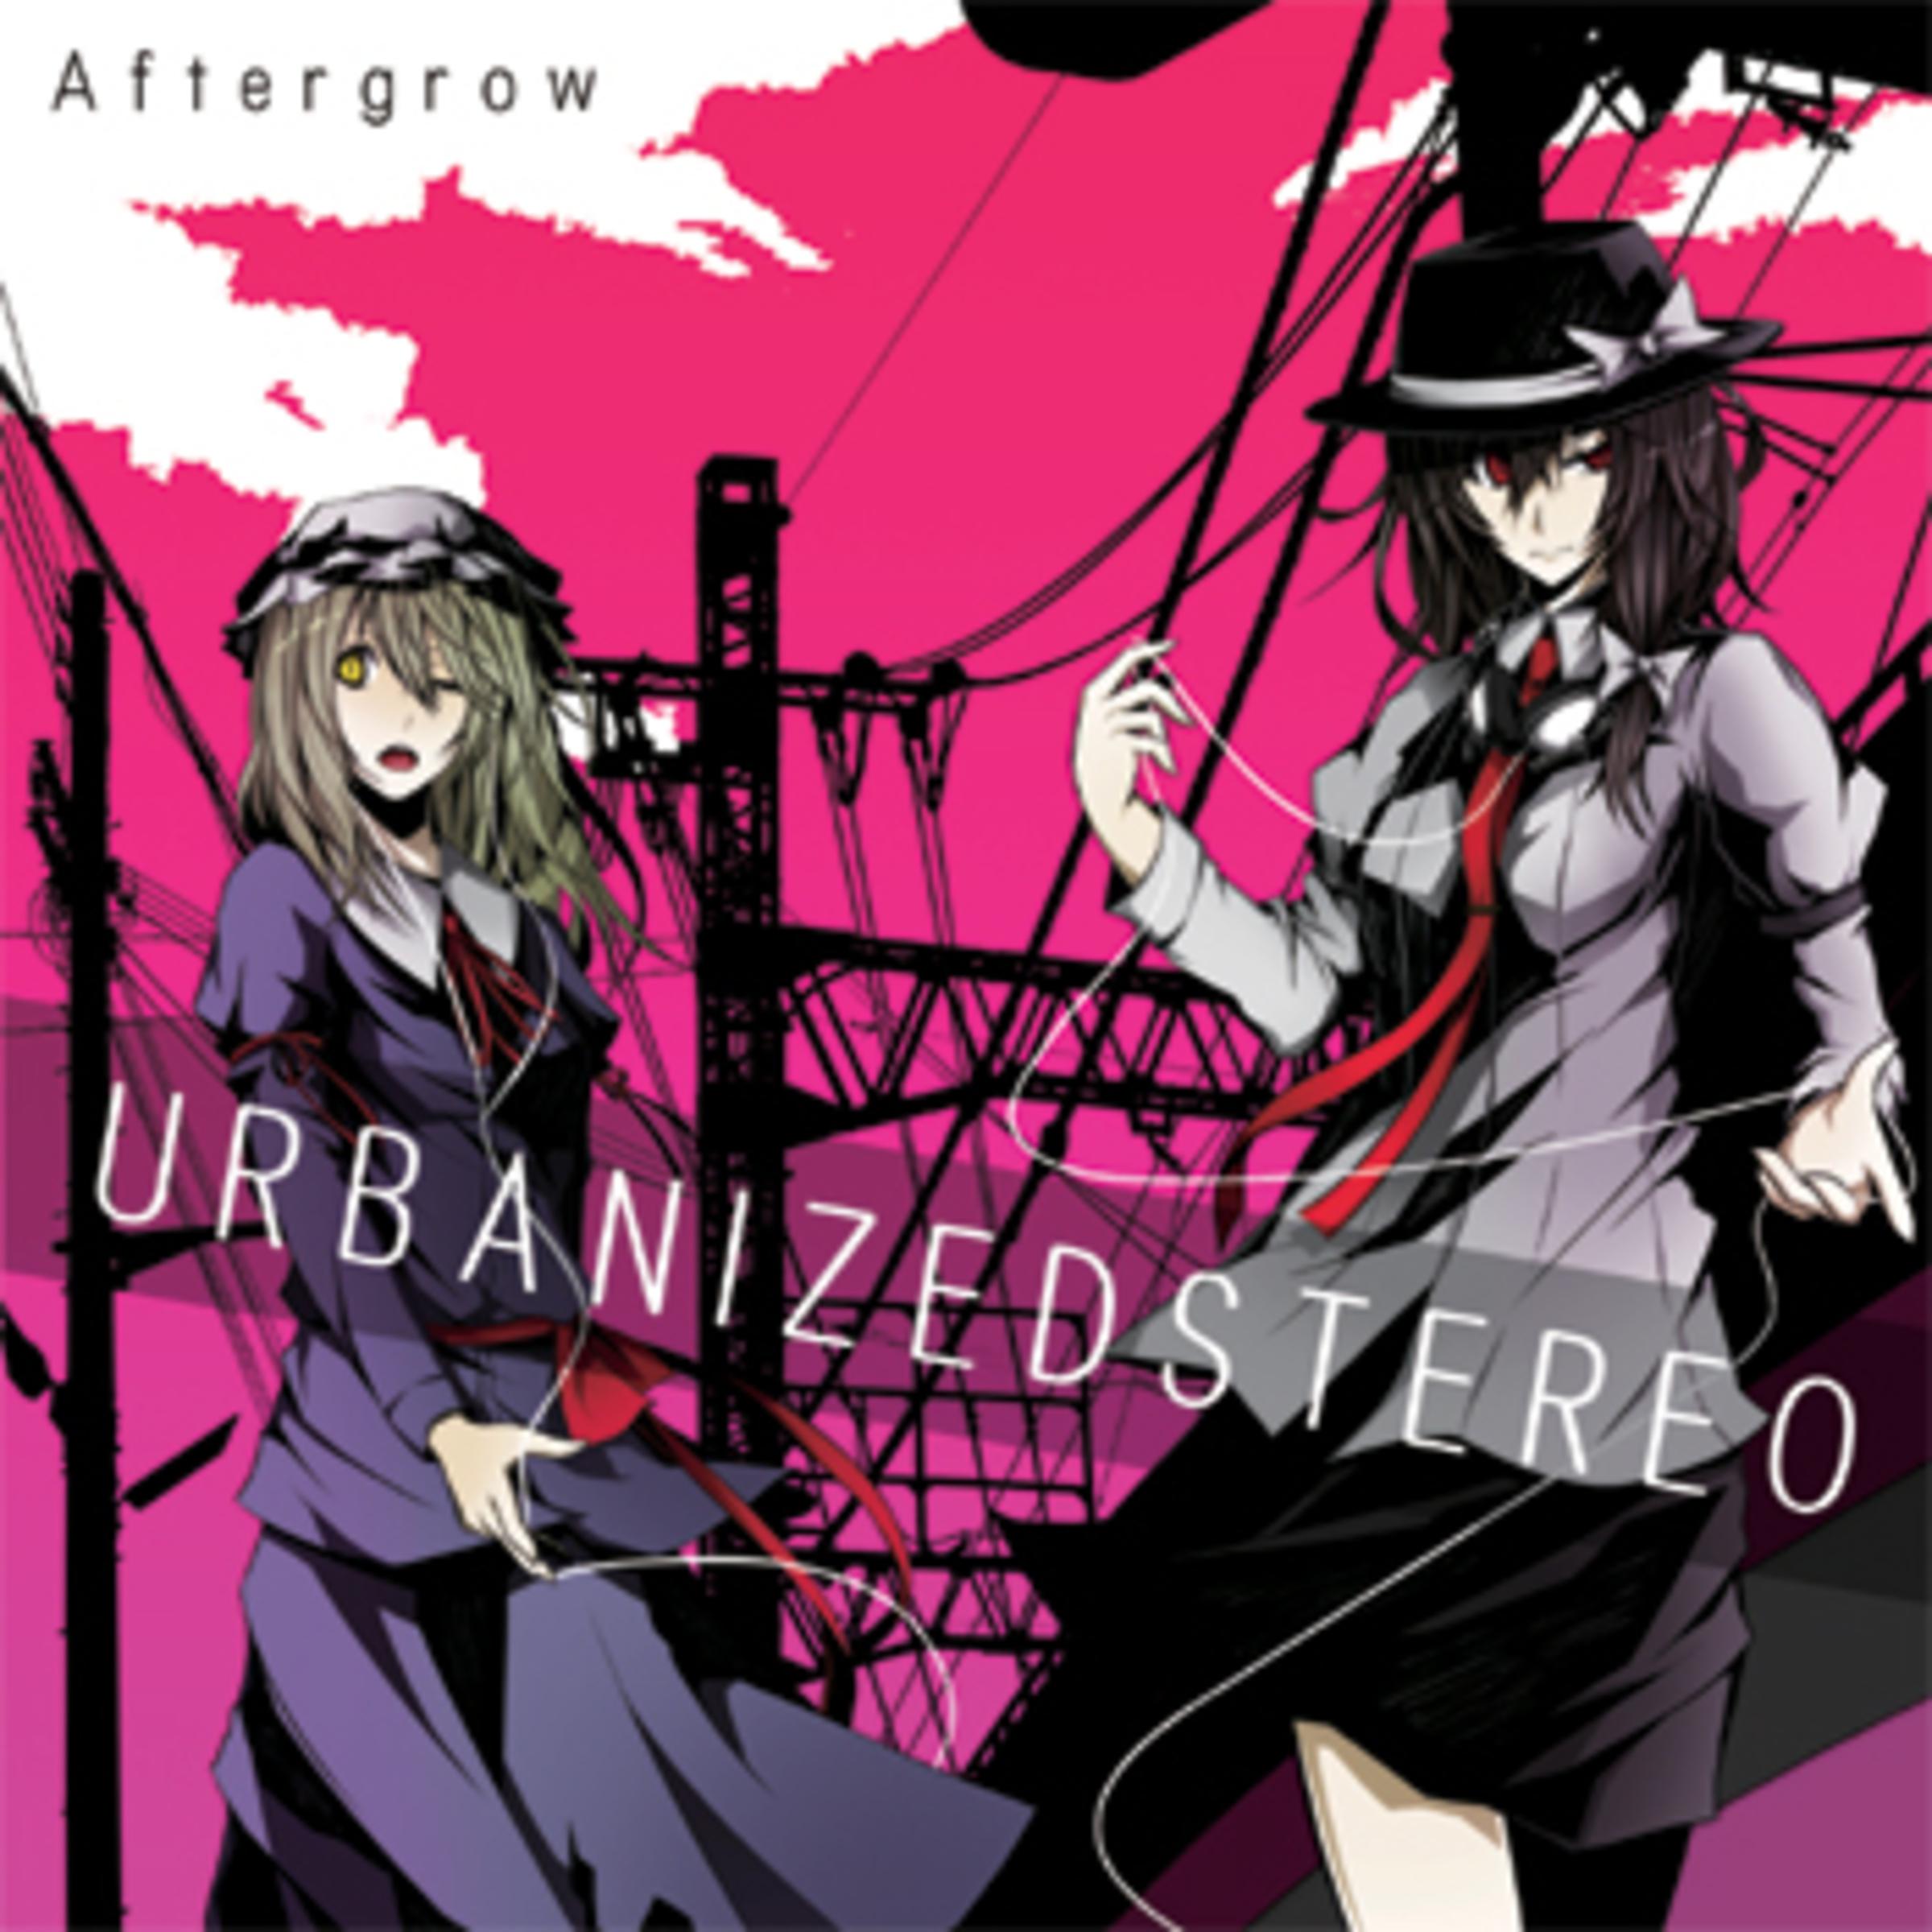 Aftergrow - エス